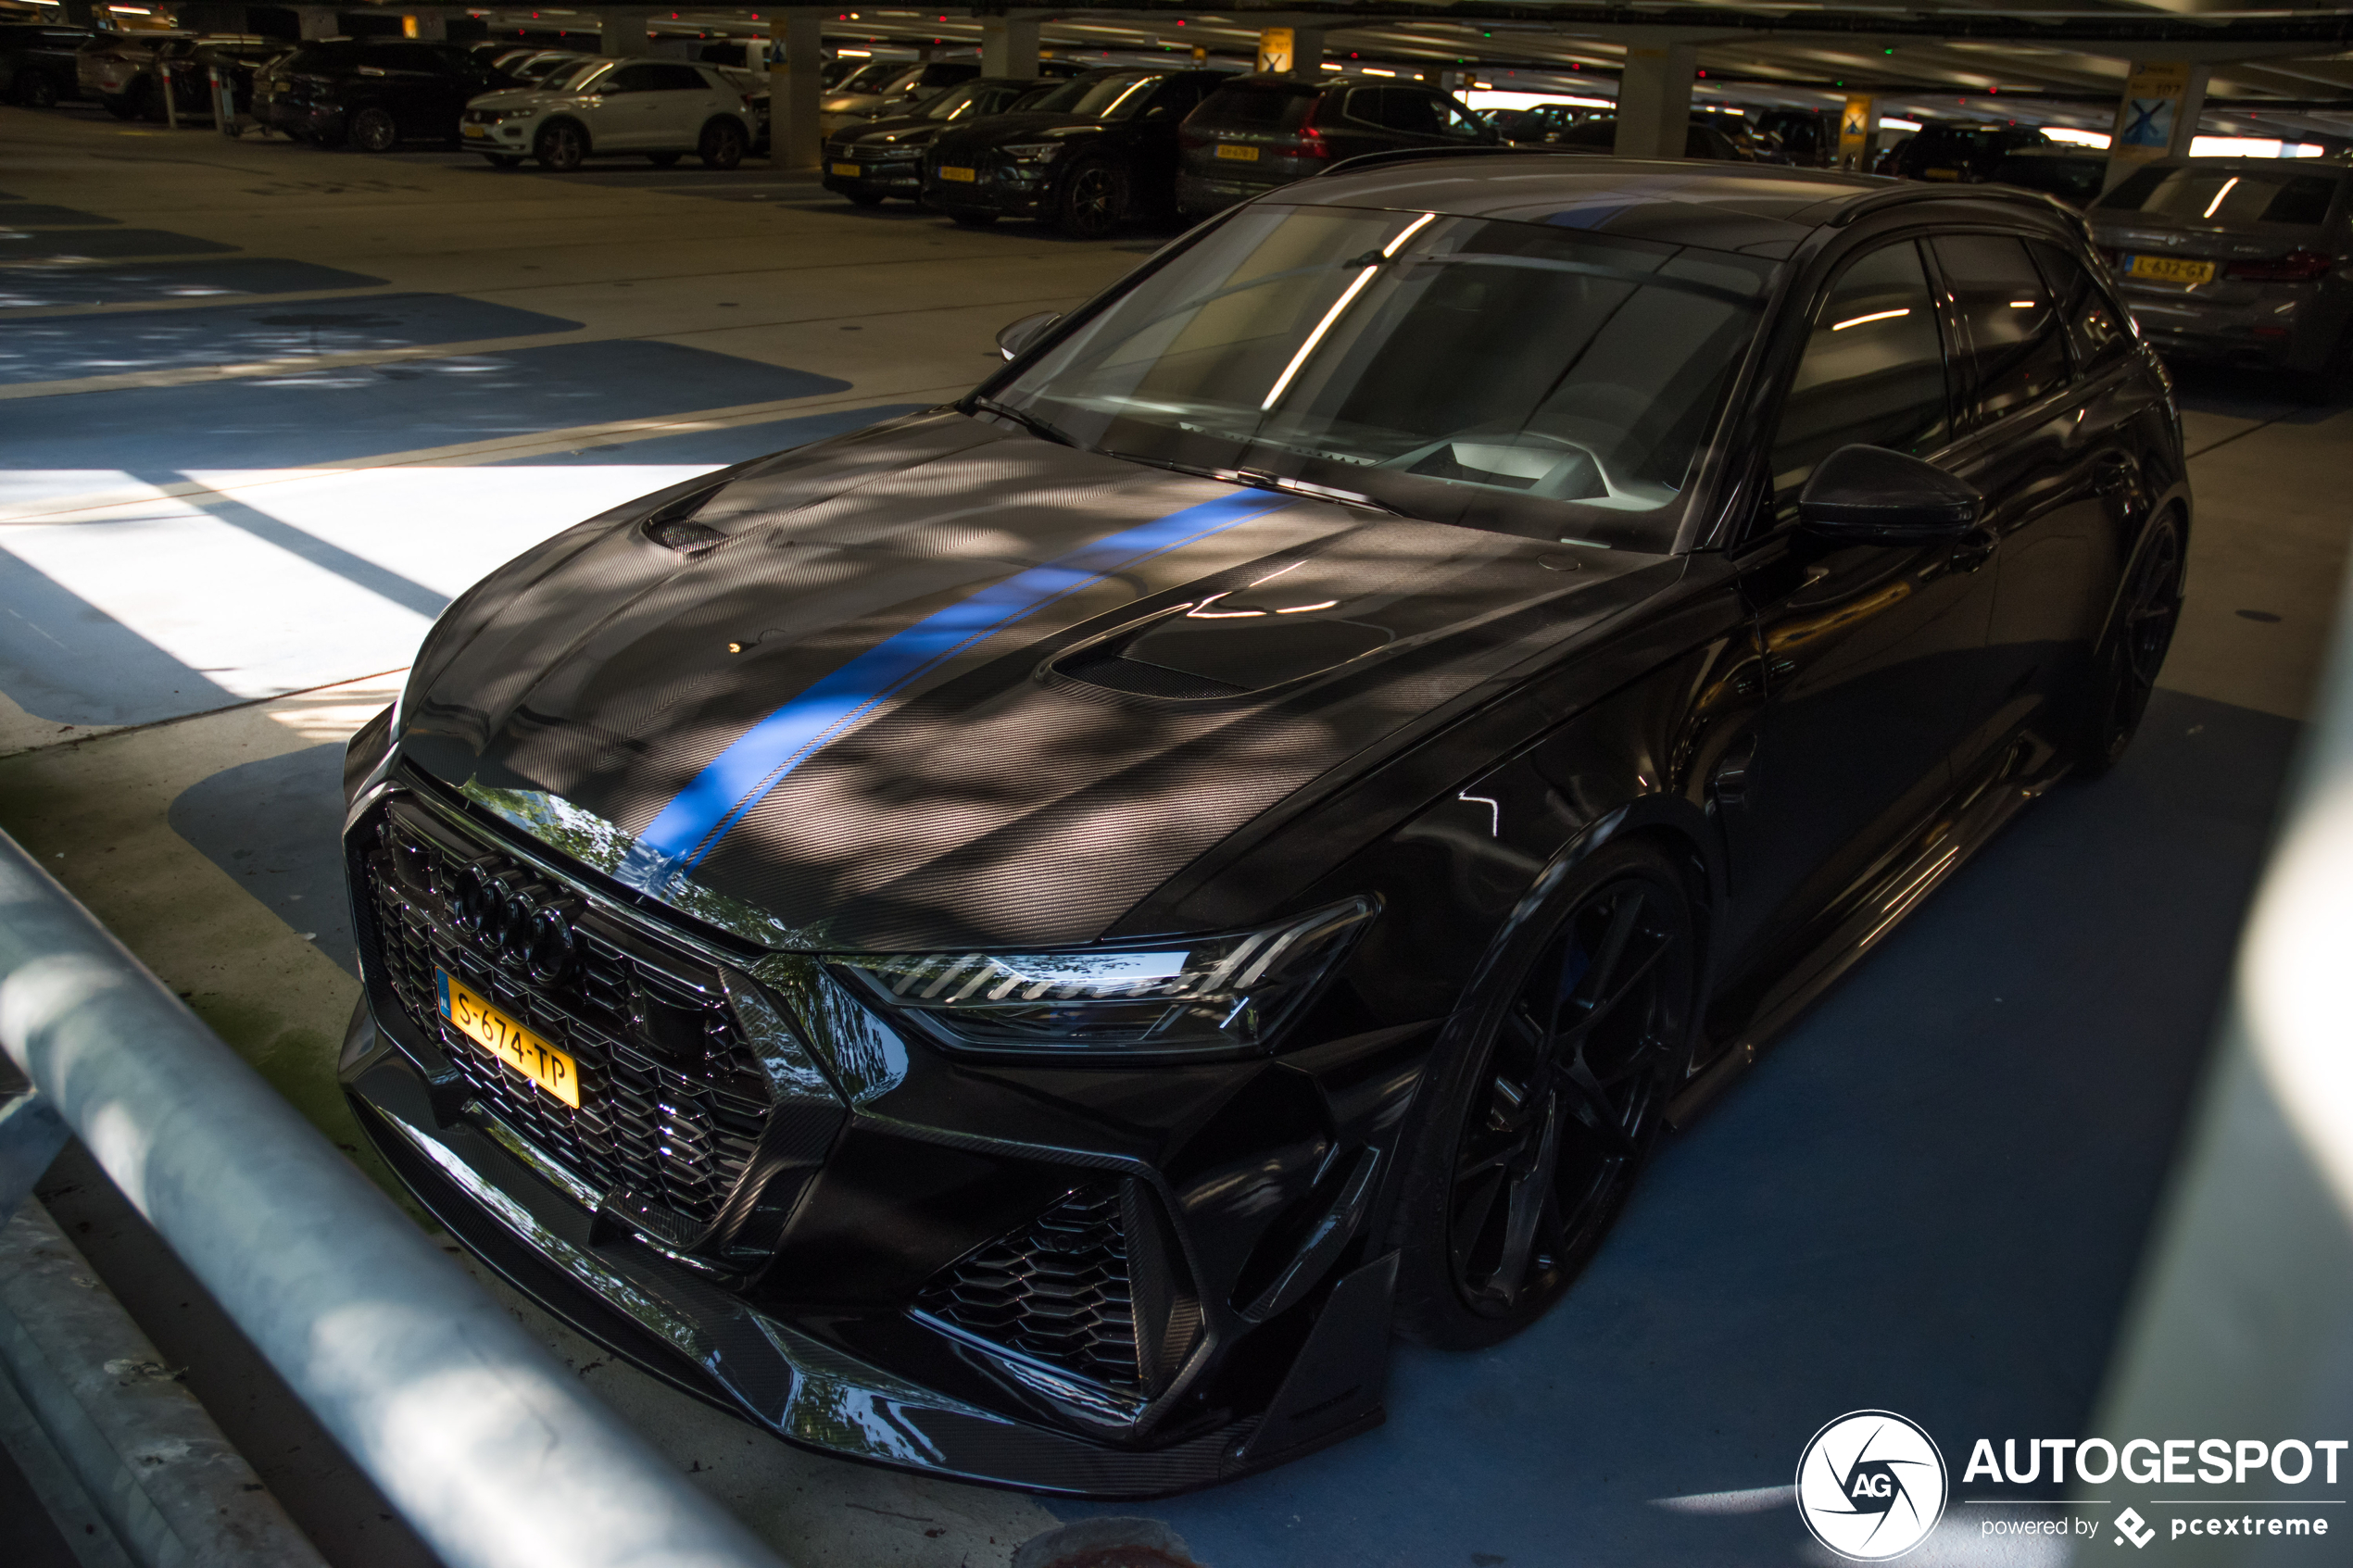 Mansory went wild with this RS6